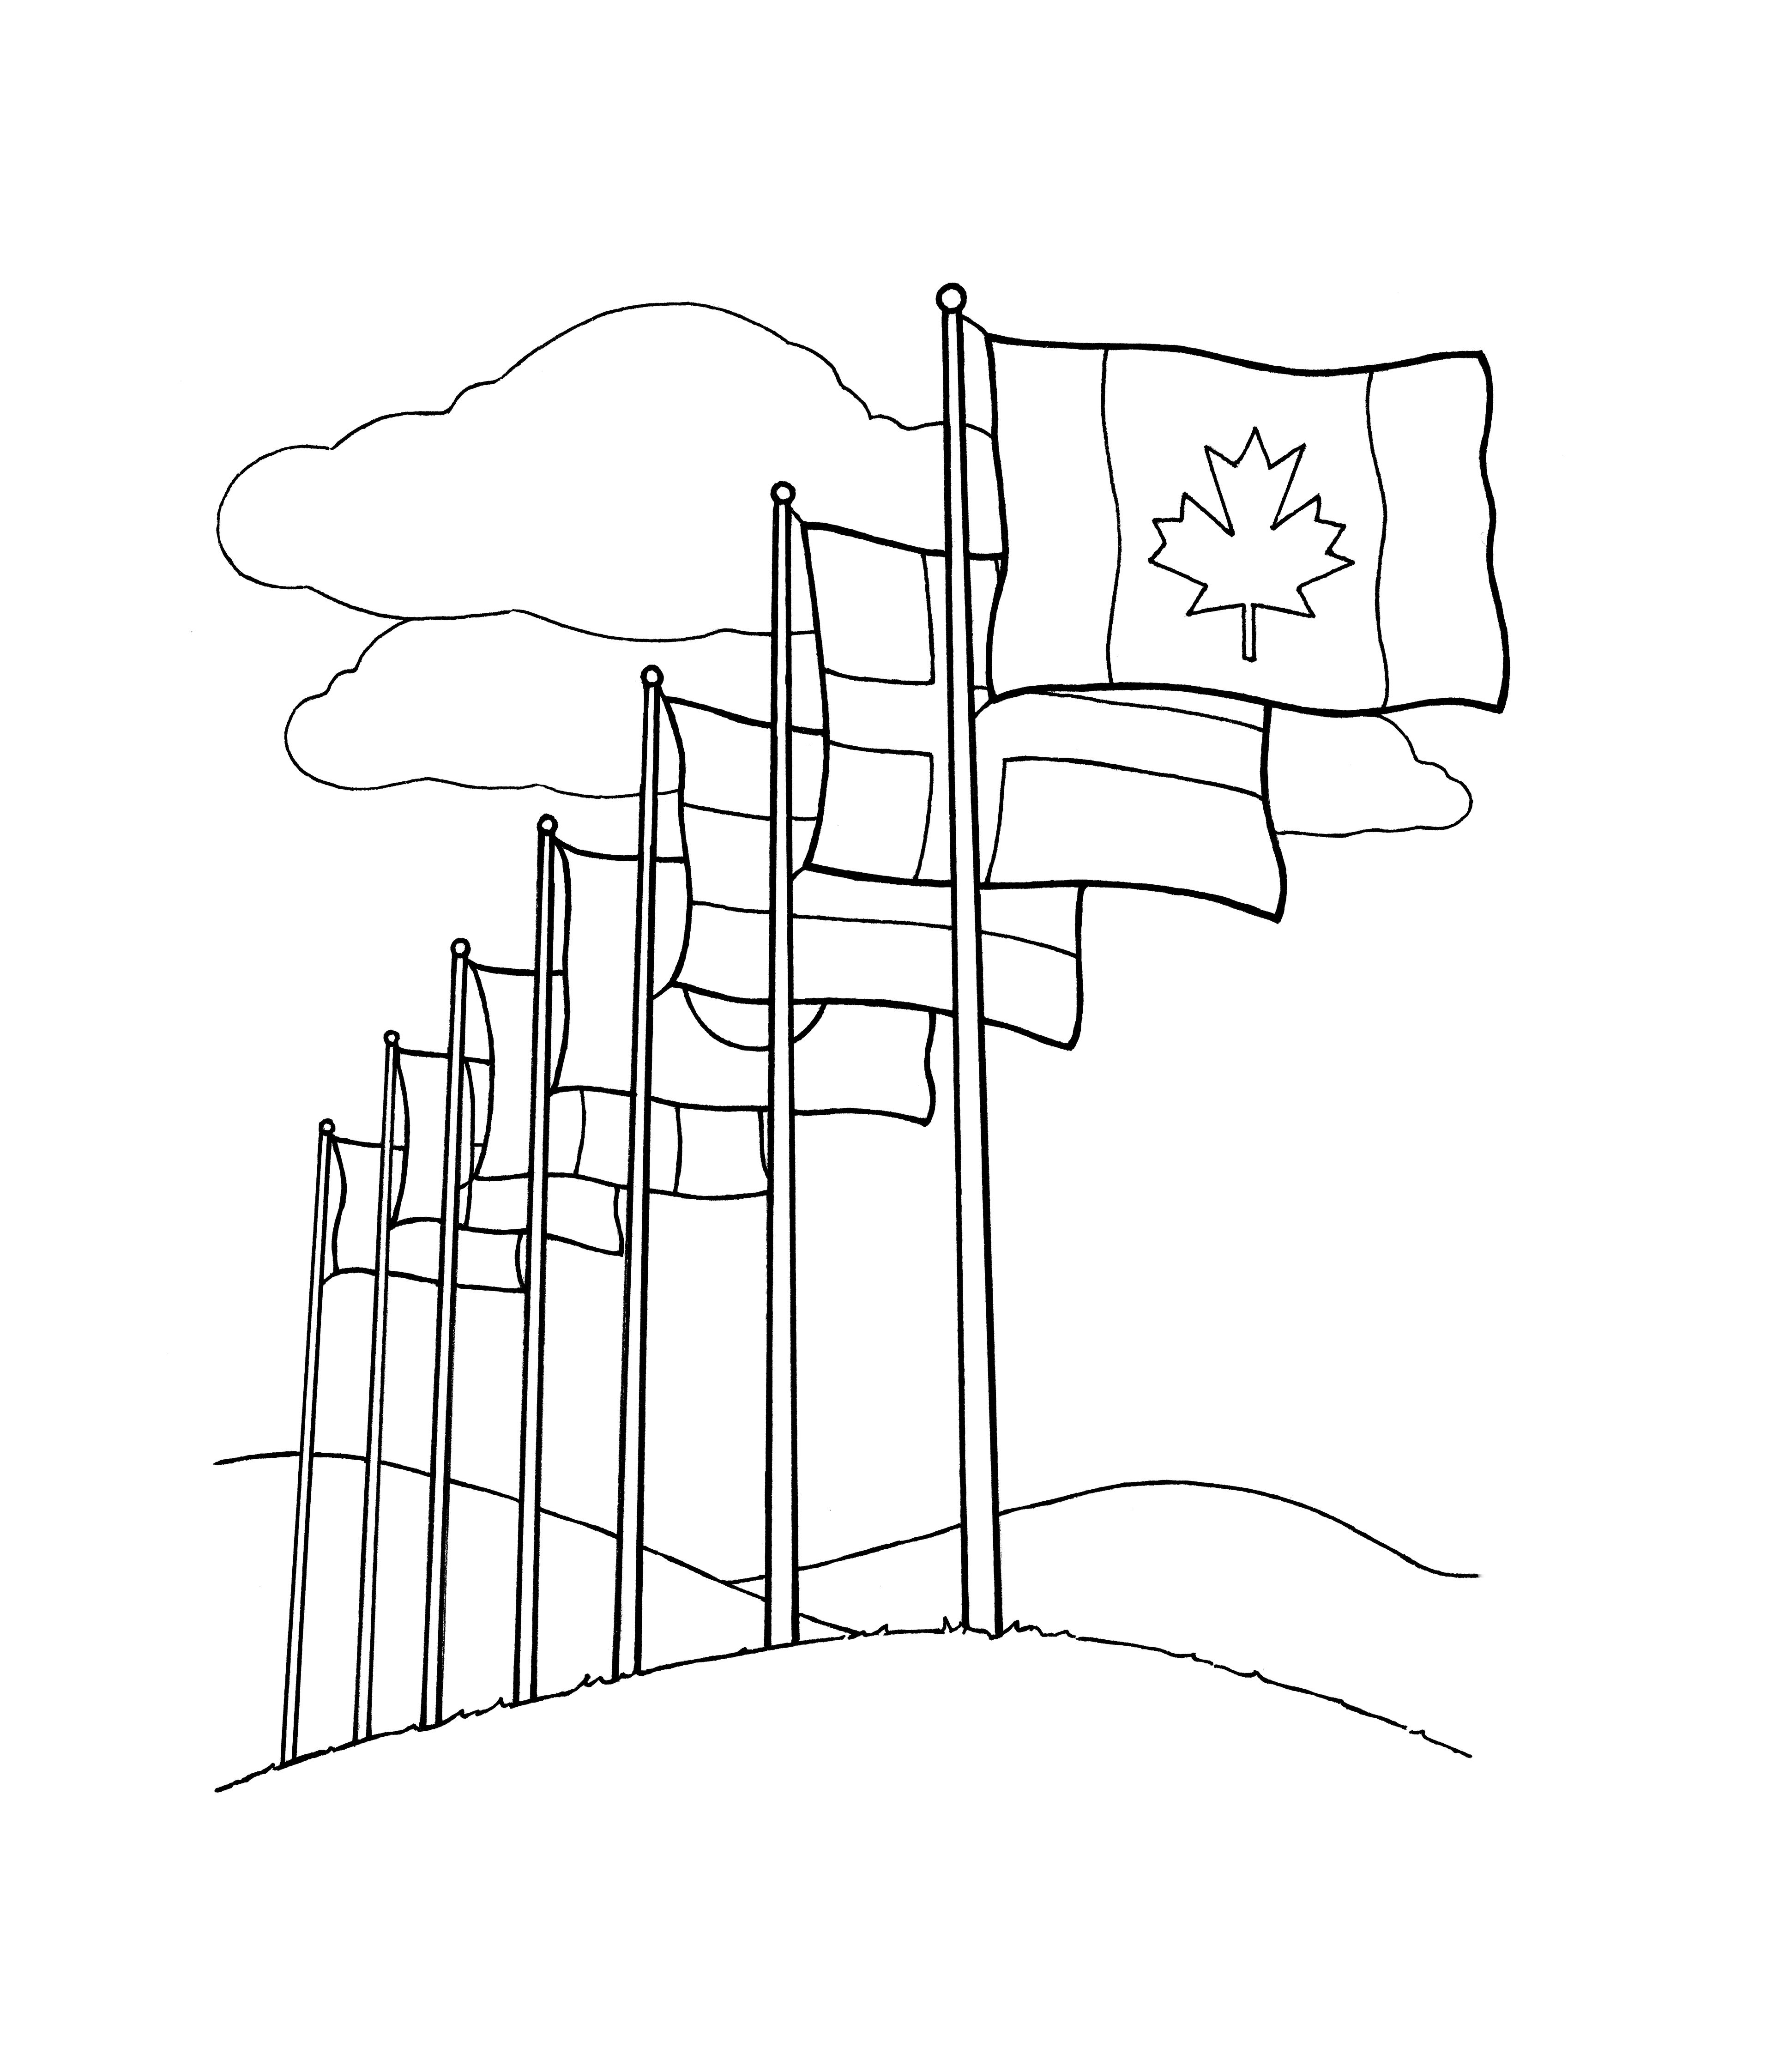 An illustration of the twelfth article of faith—“Laws” (the flags of various countries).